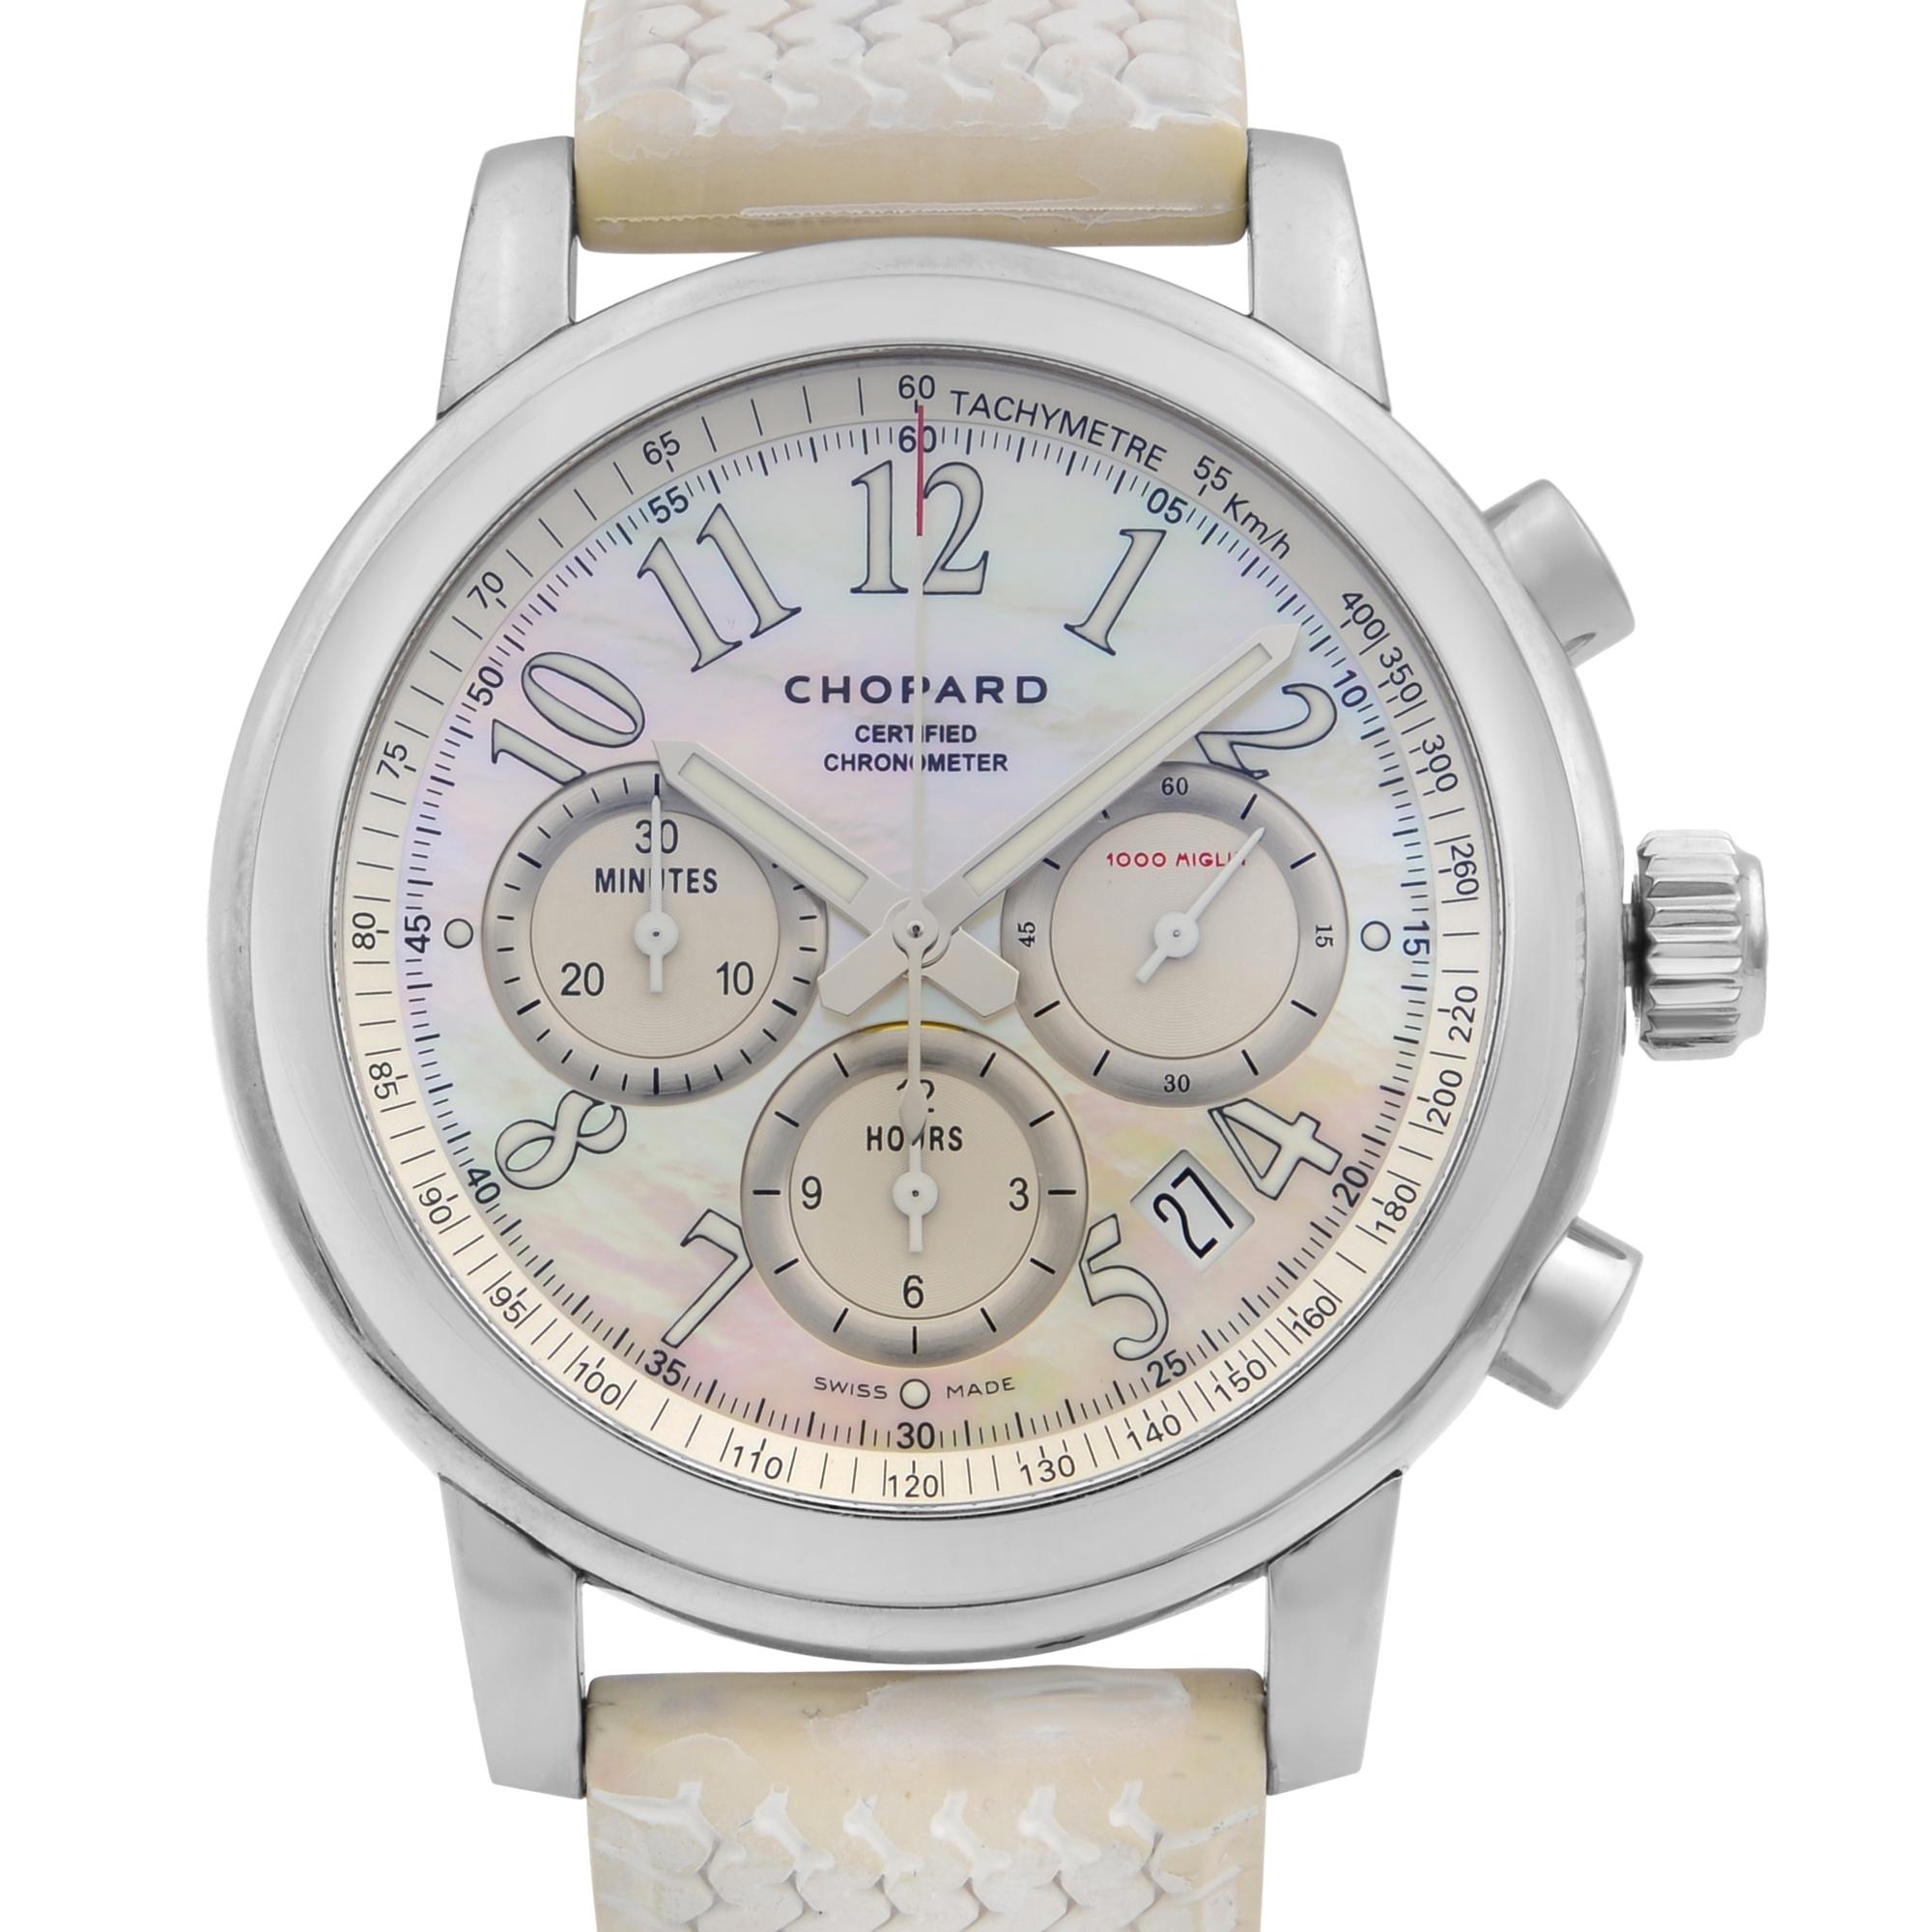 This pre-owned Chopard  168511-3018 is a beautiful Ladie's timepiece that is powered by mechanical (hand-winding) movement which is cased in a stainless steel case. It has a round shape face, chronograph, chronograph hand, date indicator, small